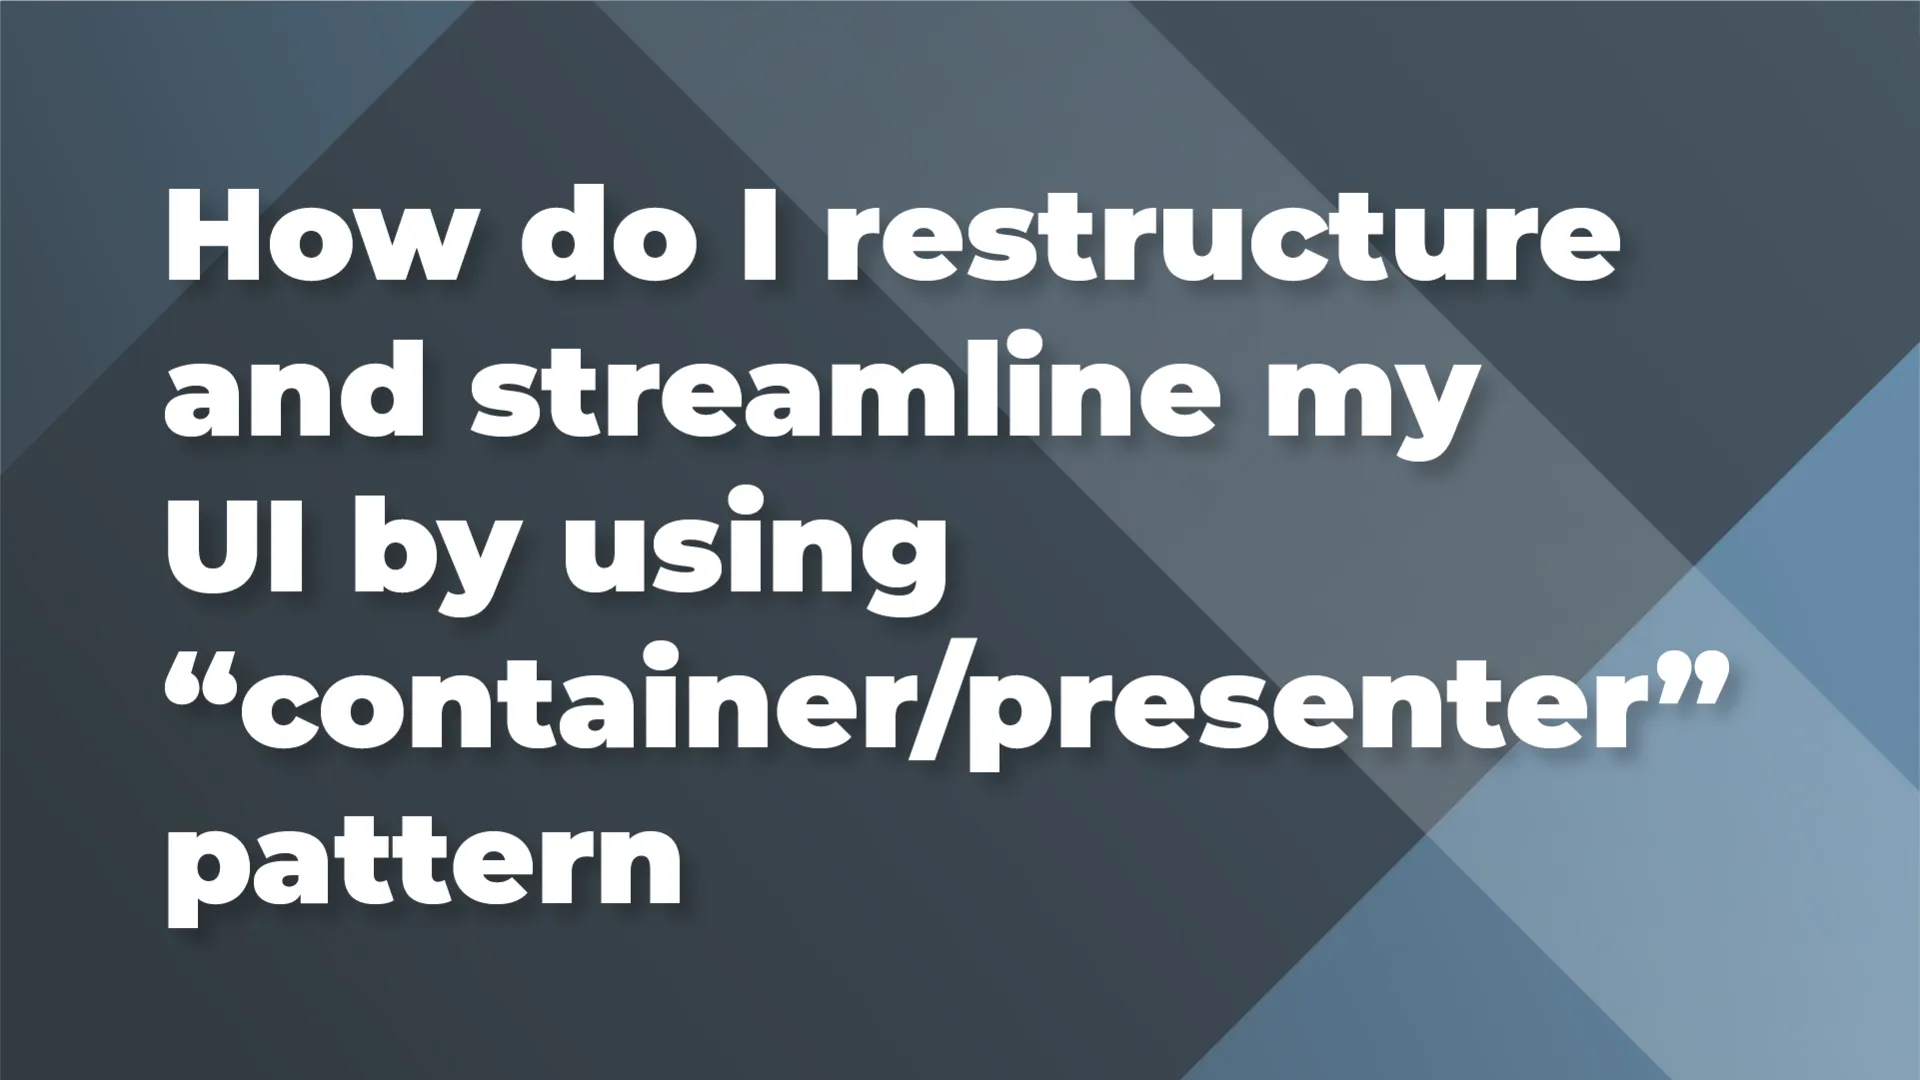 How do I restructure and streamline my UI by using “container/presenter” pattern?